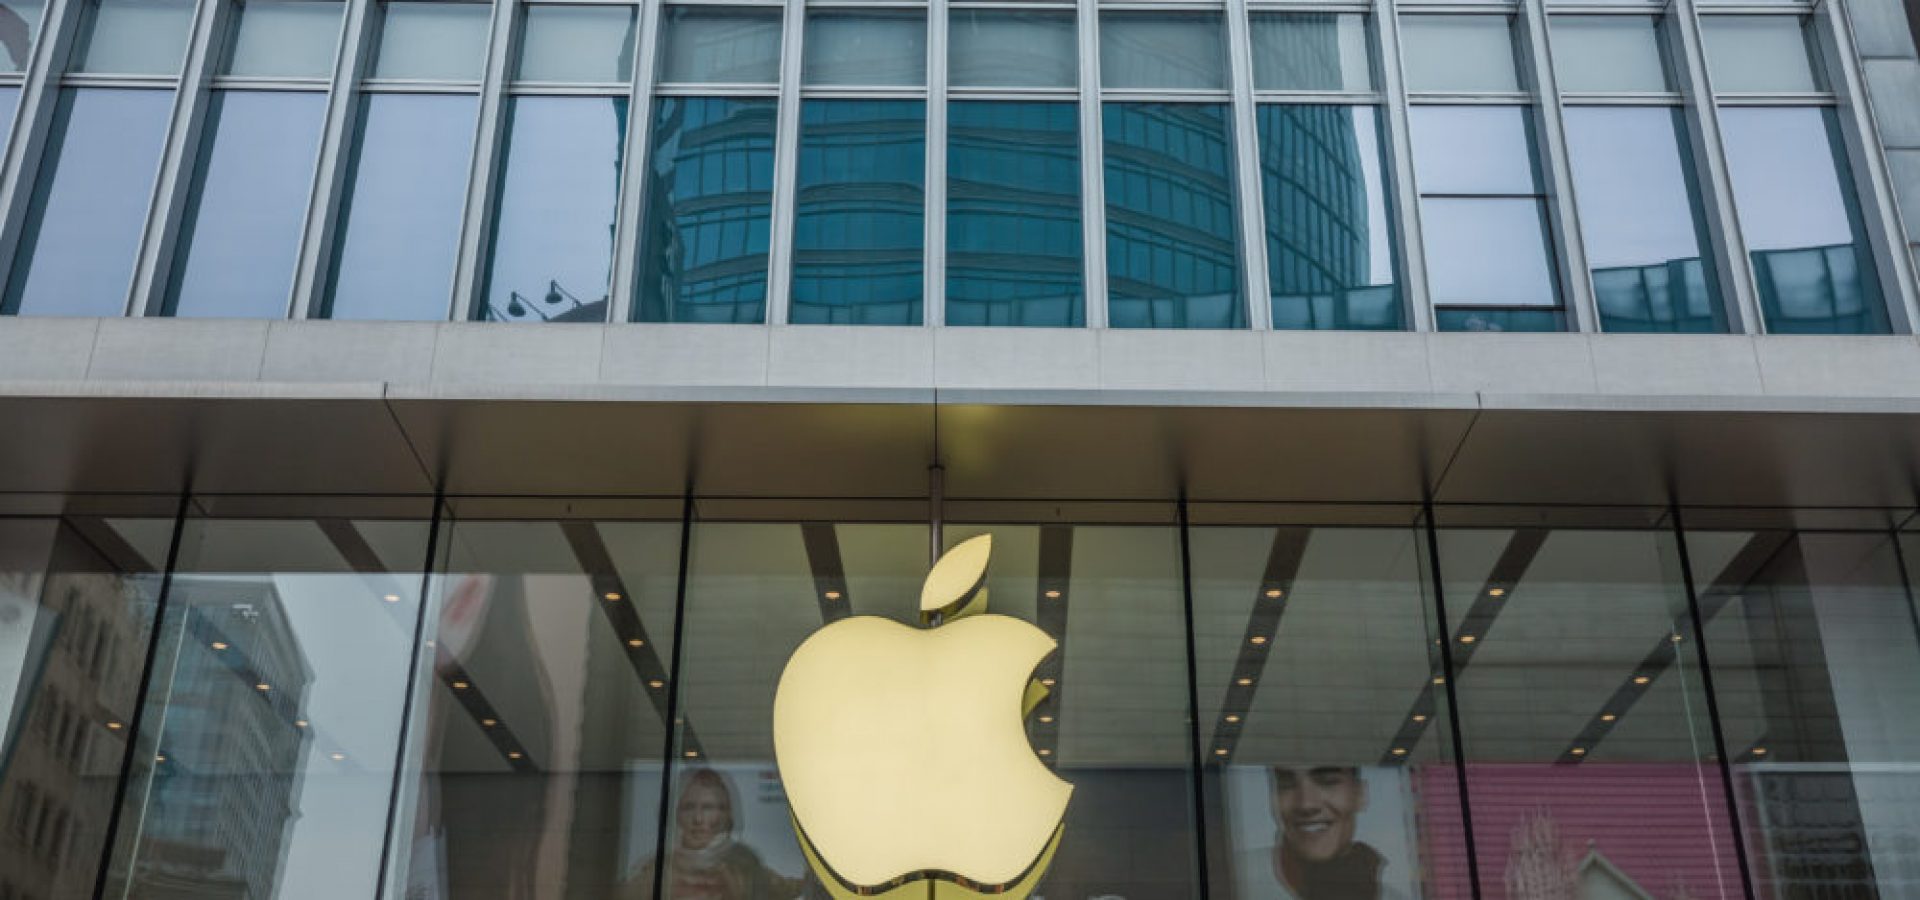 Apple released quarterly financial results